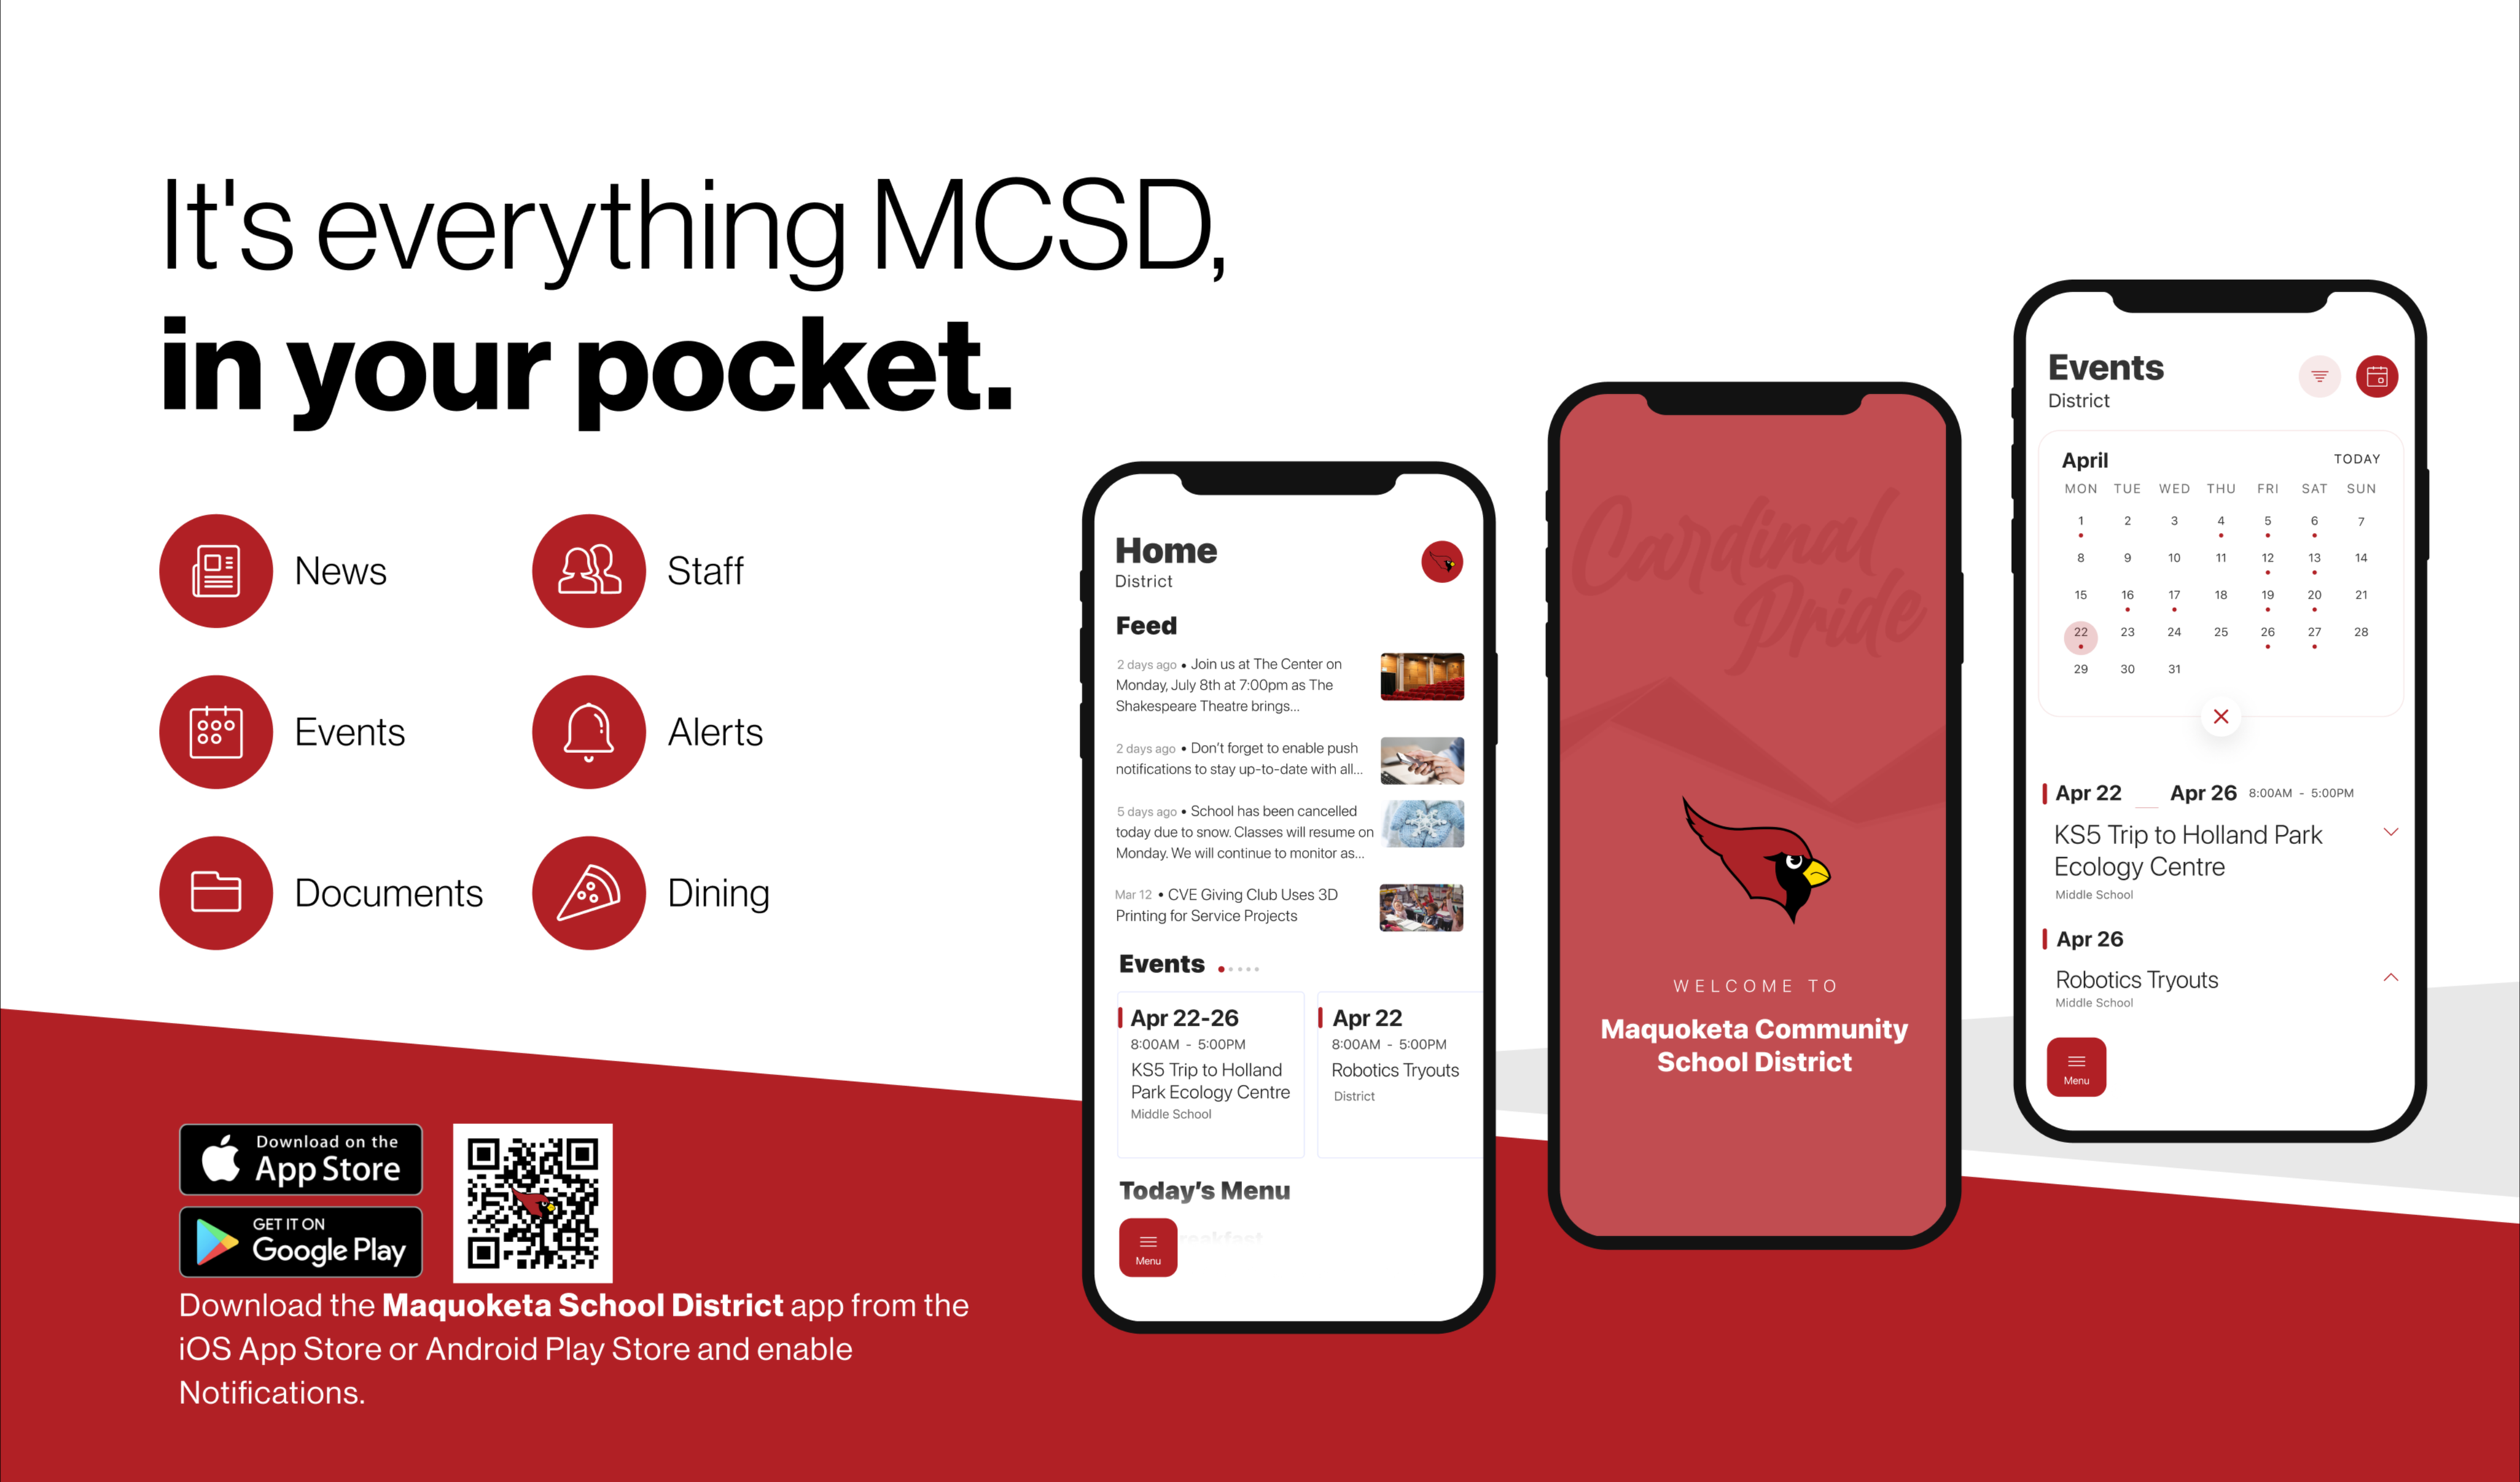 We have a new app! Its everything MCSD in your pocket. 